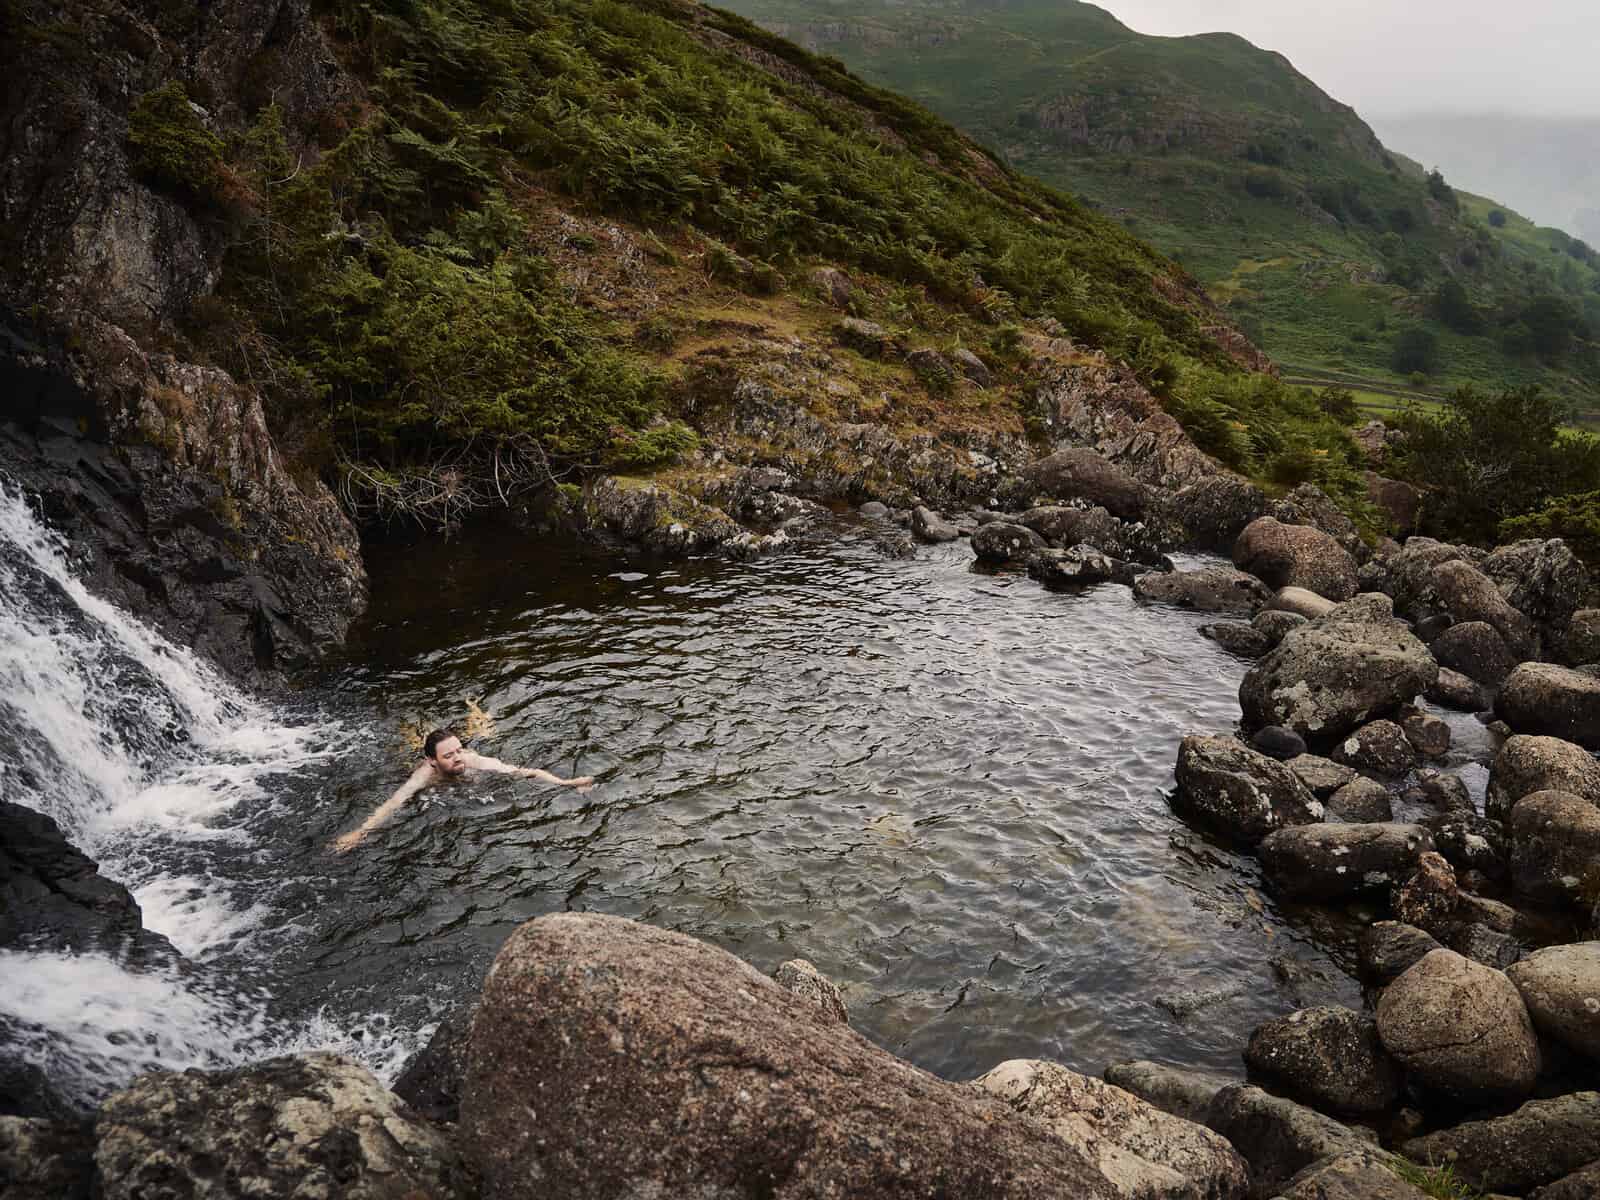 ID: A landscape image. Looking down on Matt who is swimming in a waterfall pool. In the foreground is a waterfall and pool and in the background we can see a mountain view.&nbsp;